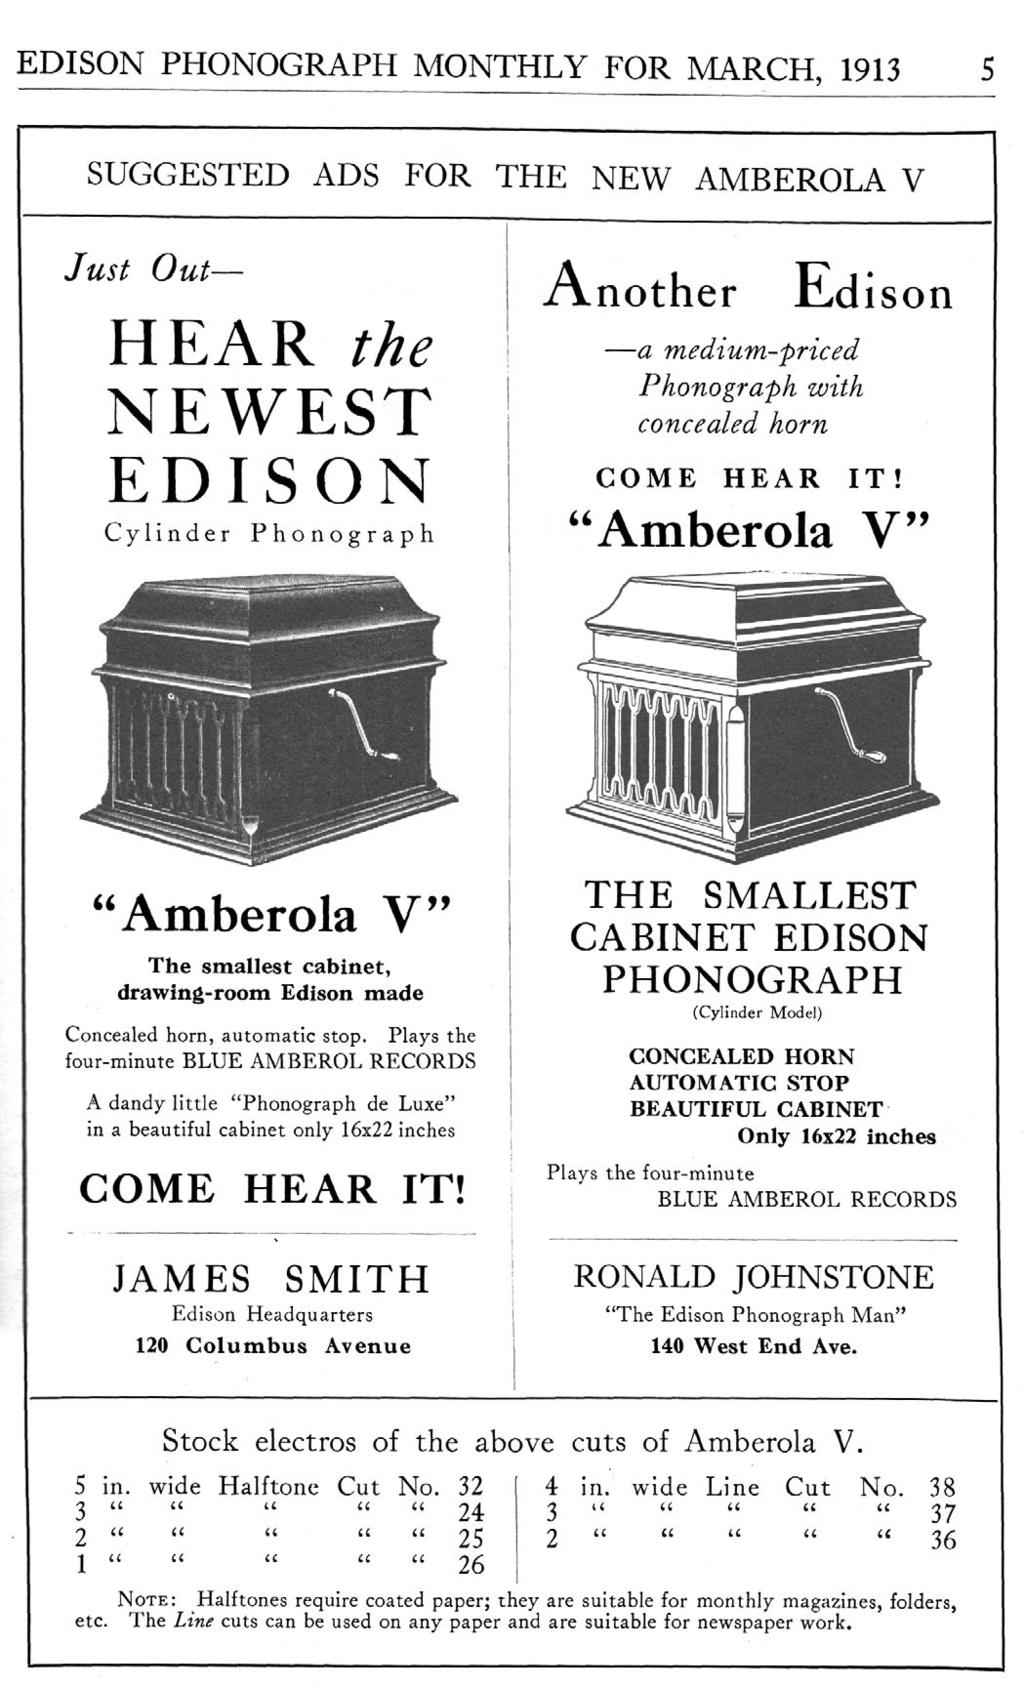 ARCHIVE ARTIFACTS Another ad for the superior new Edison Amberola V (EPM Mar. 1913, p.